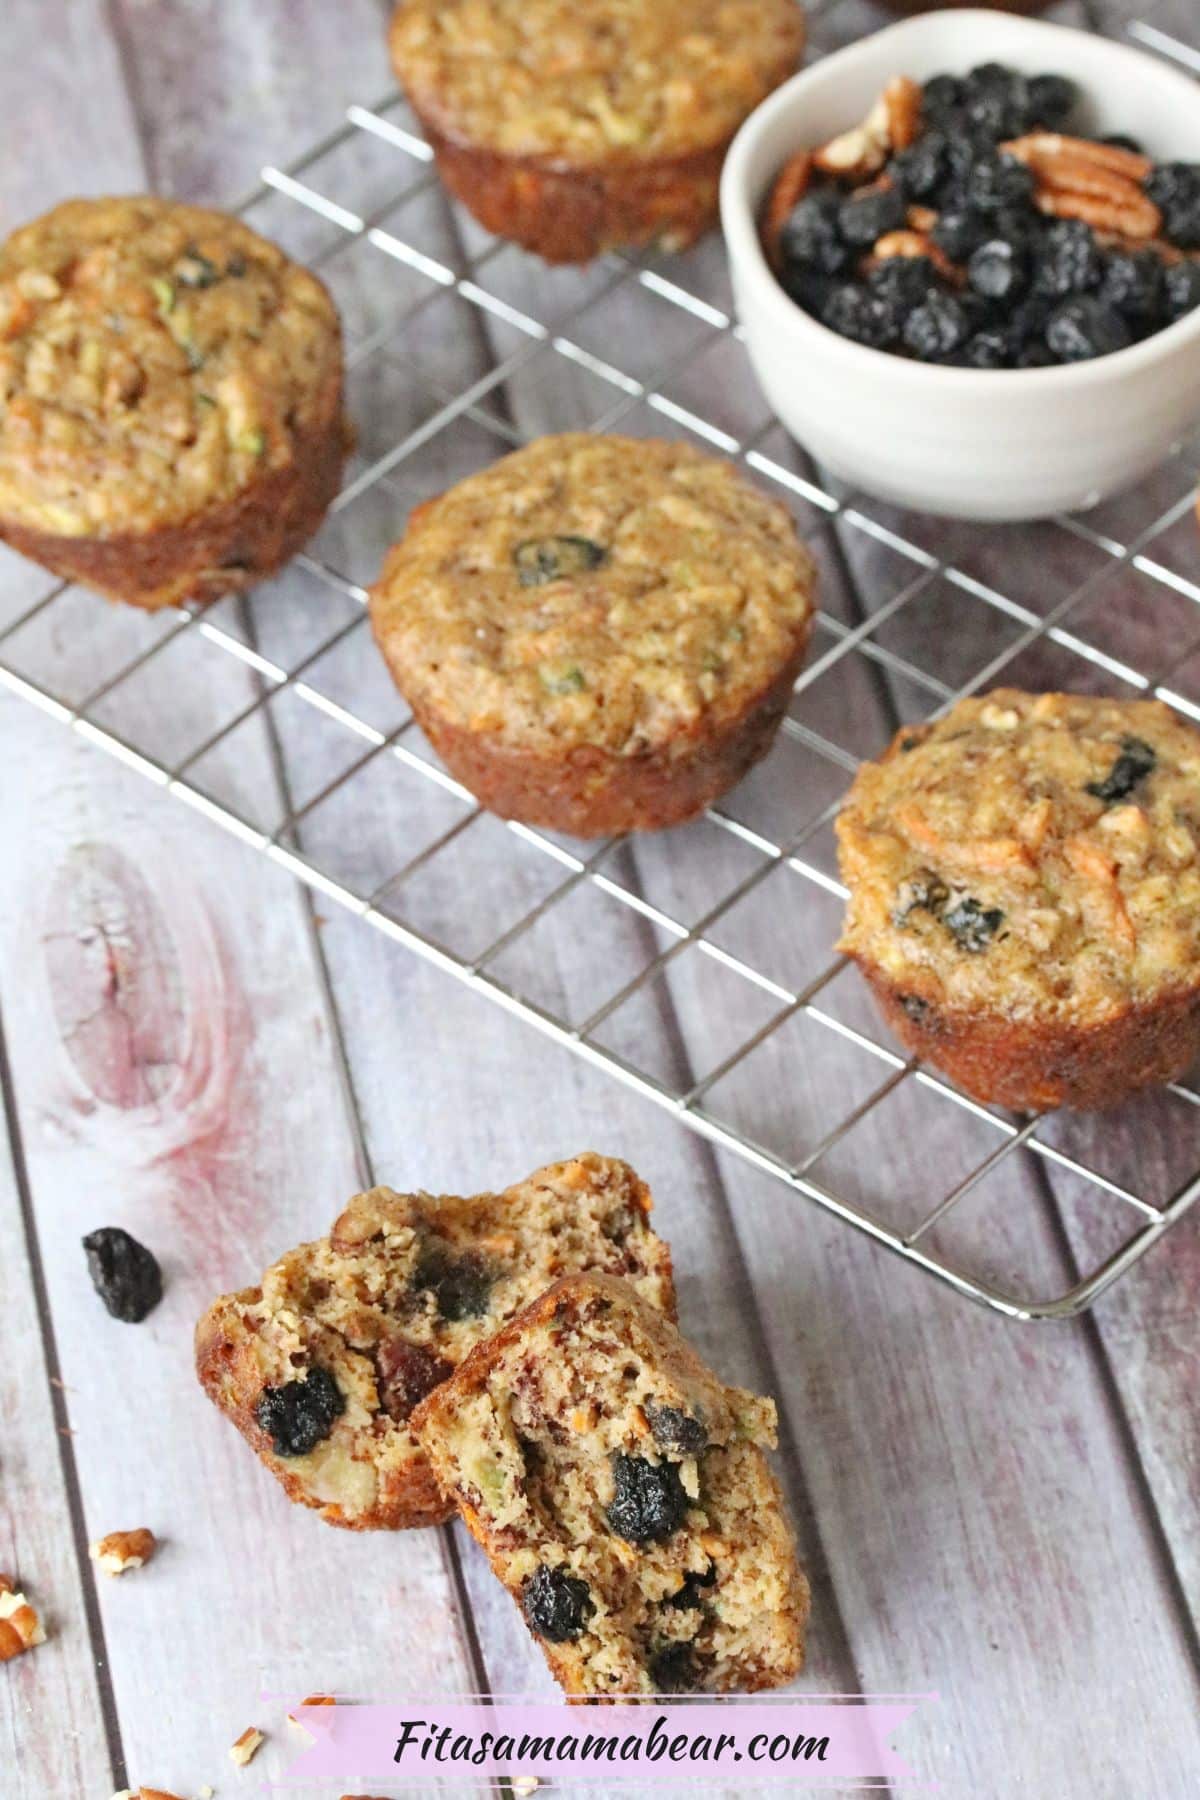 One morning glory muffin split in half with more muffins and a bowl of dried fruit on a cooling rack behind it